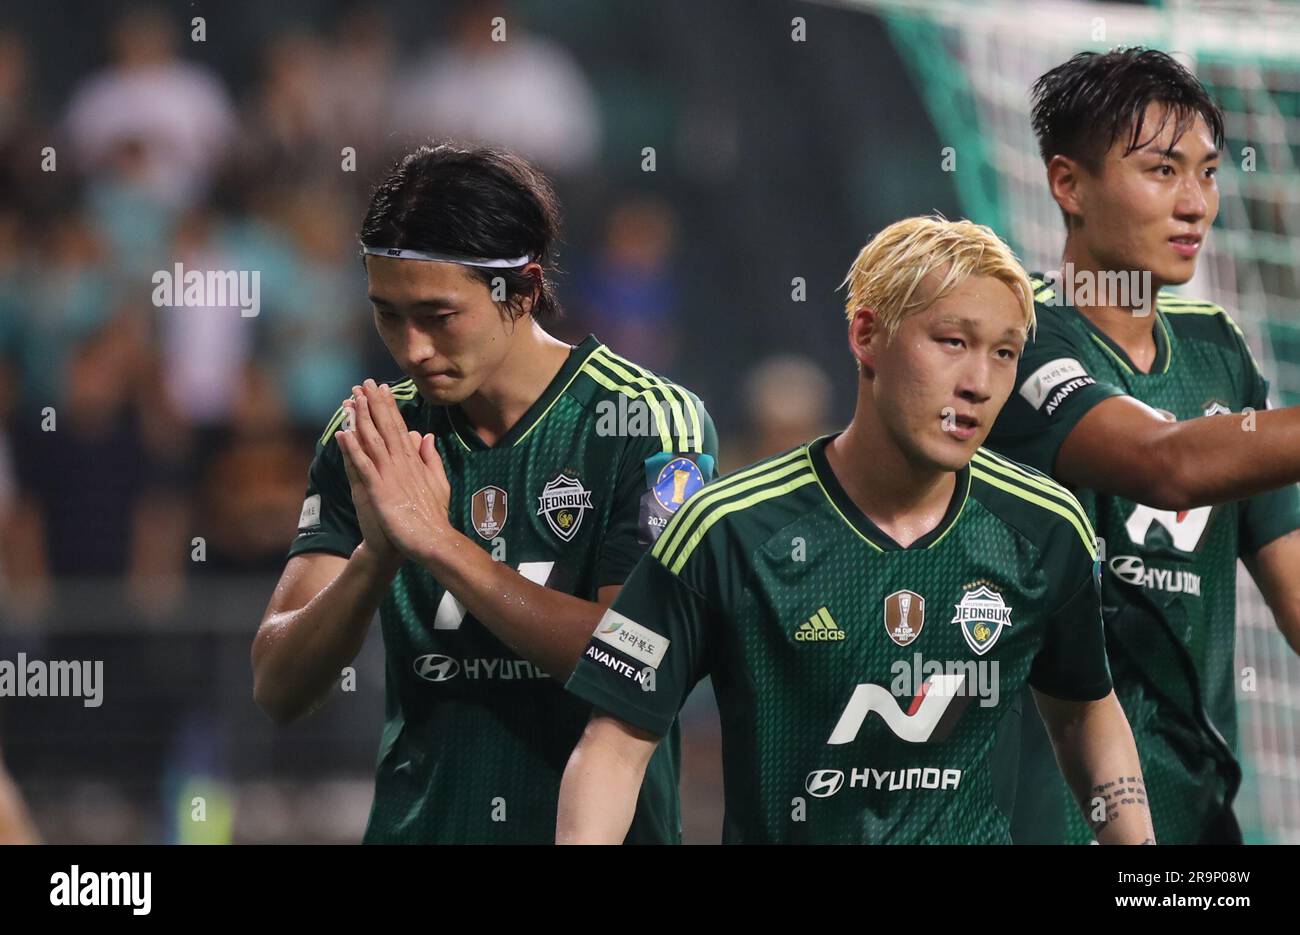 https://c8.alamy.com/comp/2R9P08W/28th-june-2023-living-on-a-prayer-jeonbuk-hyundai-motors-forward-cho-gue-sung-l-celebrates-after-scoring-a-goal-against-gwangju-fc-during-the-quarterfinal-match-of-the-fa-cup-tournament-at-jeonju-world-cup-stadium-in-jeonju-north-jeolla-province-southwestern-south-korea-on-june-28-2023-credit-yonhapnewcomalamy-live-news-2R9P08W.jpg